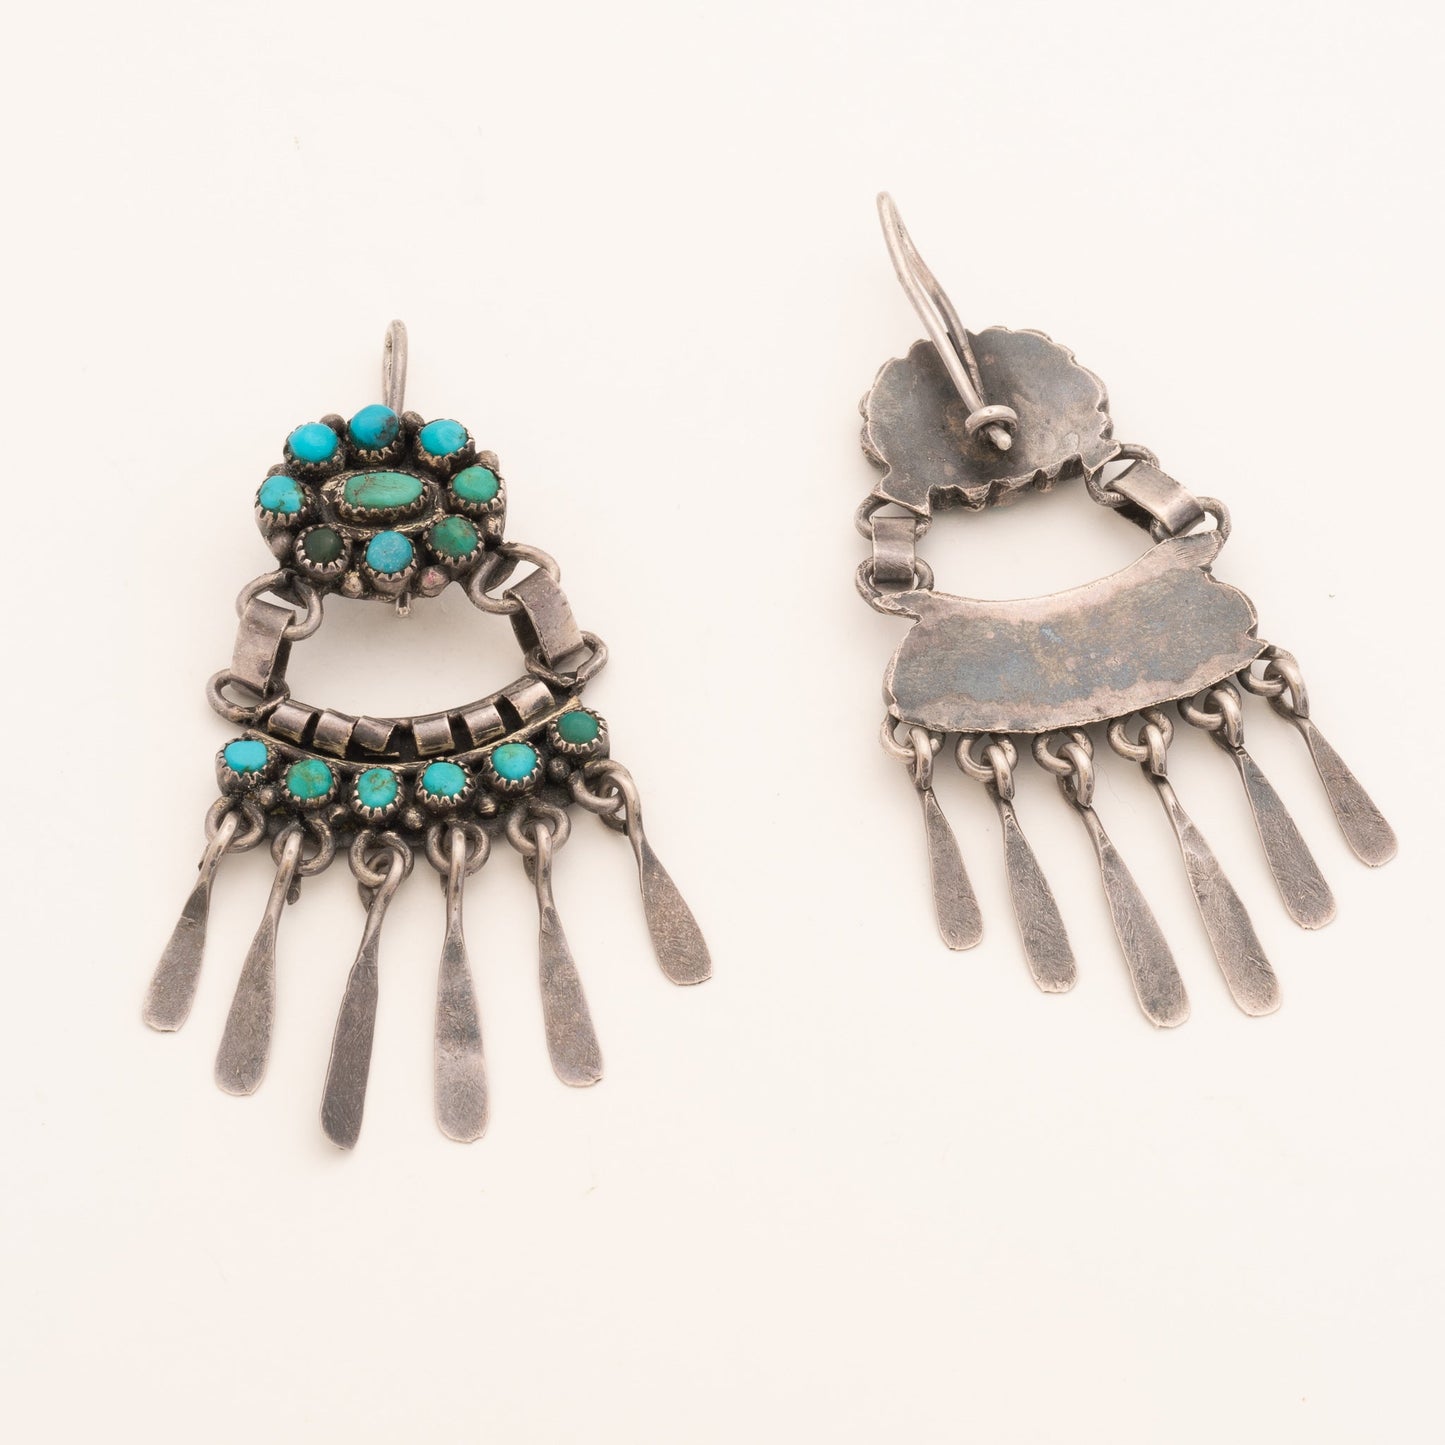 Vintage Navajo Dangle Earrings of Turquoise and Silver Clusters - Turquoise & Tufa